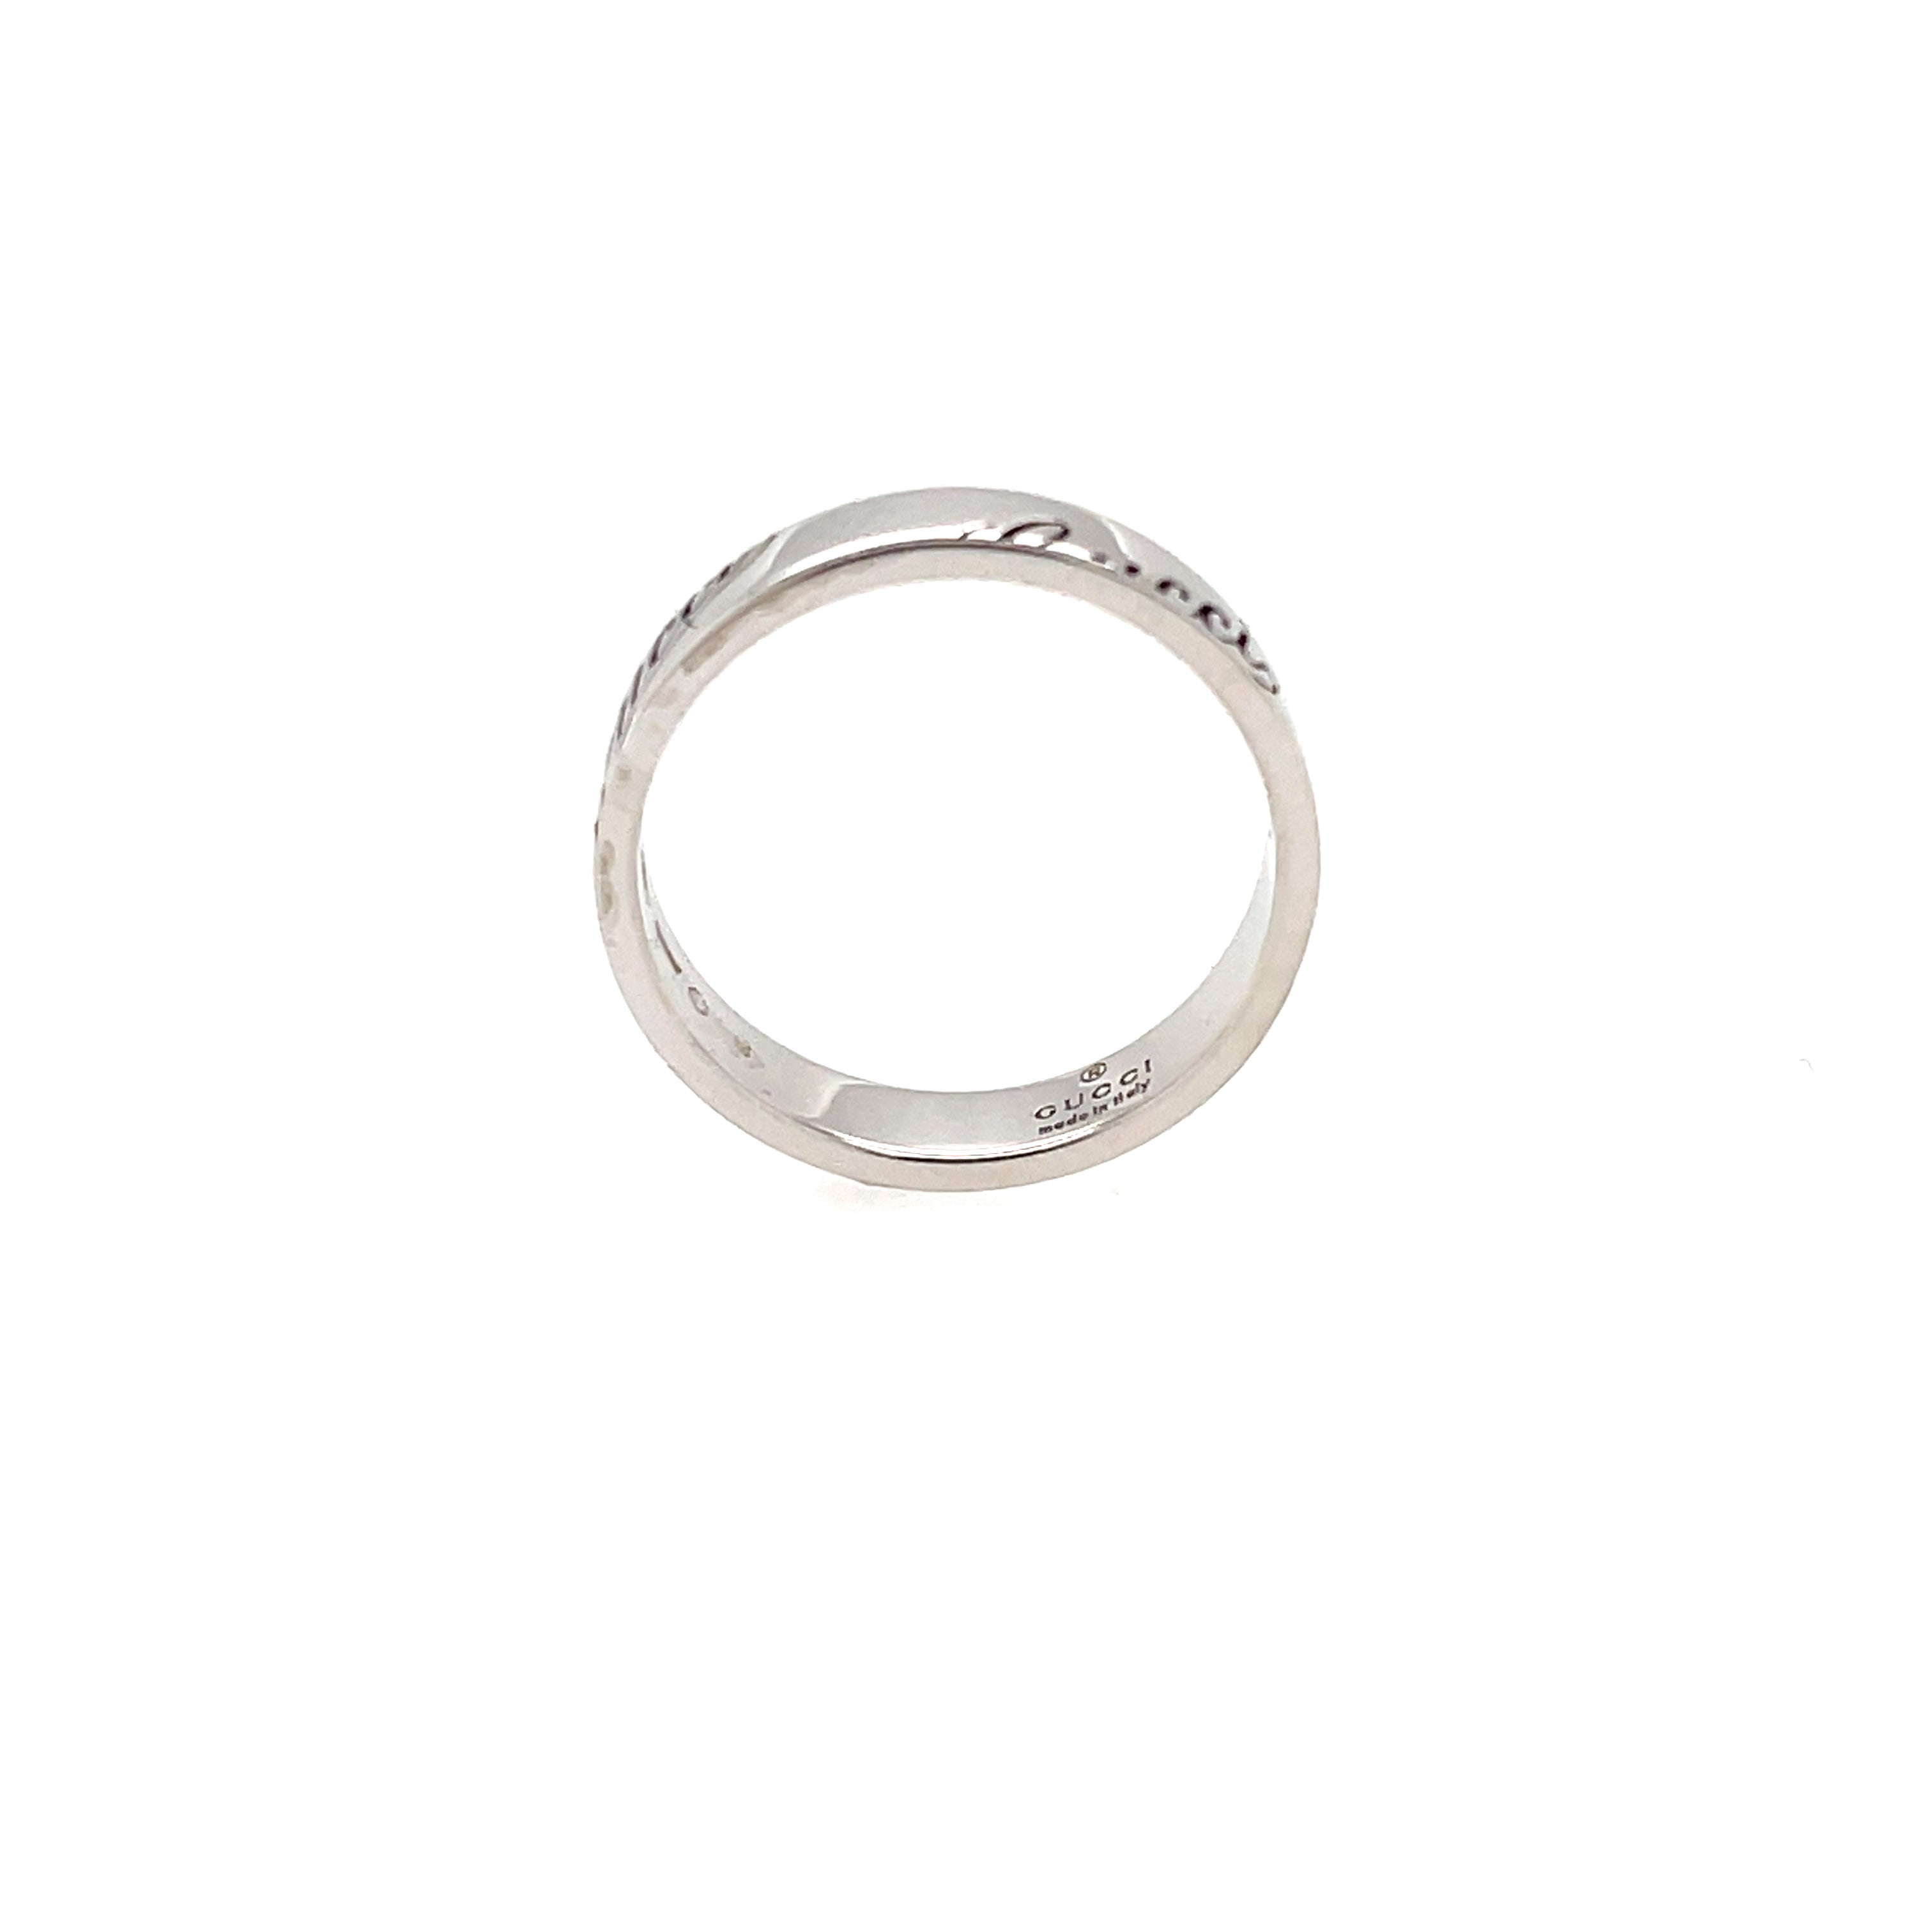 GUCCI 18ct White Gold 'Script' Band Ring Size M SOLD